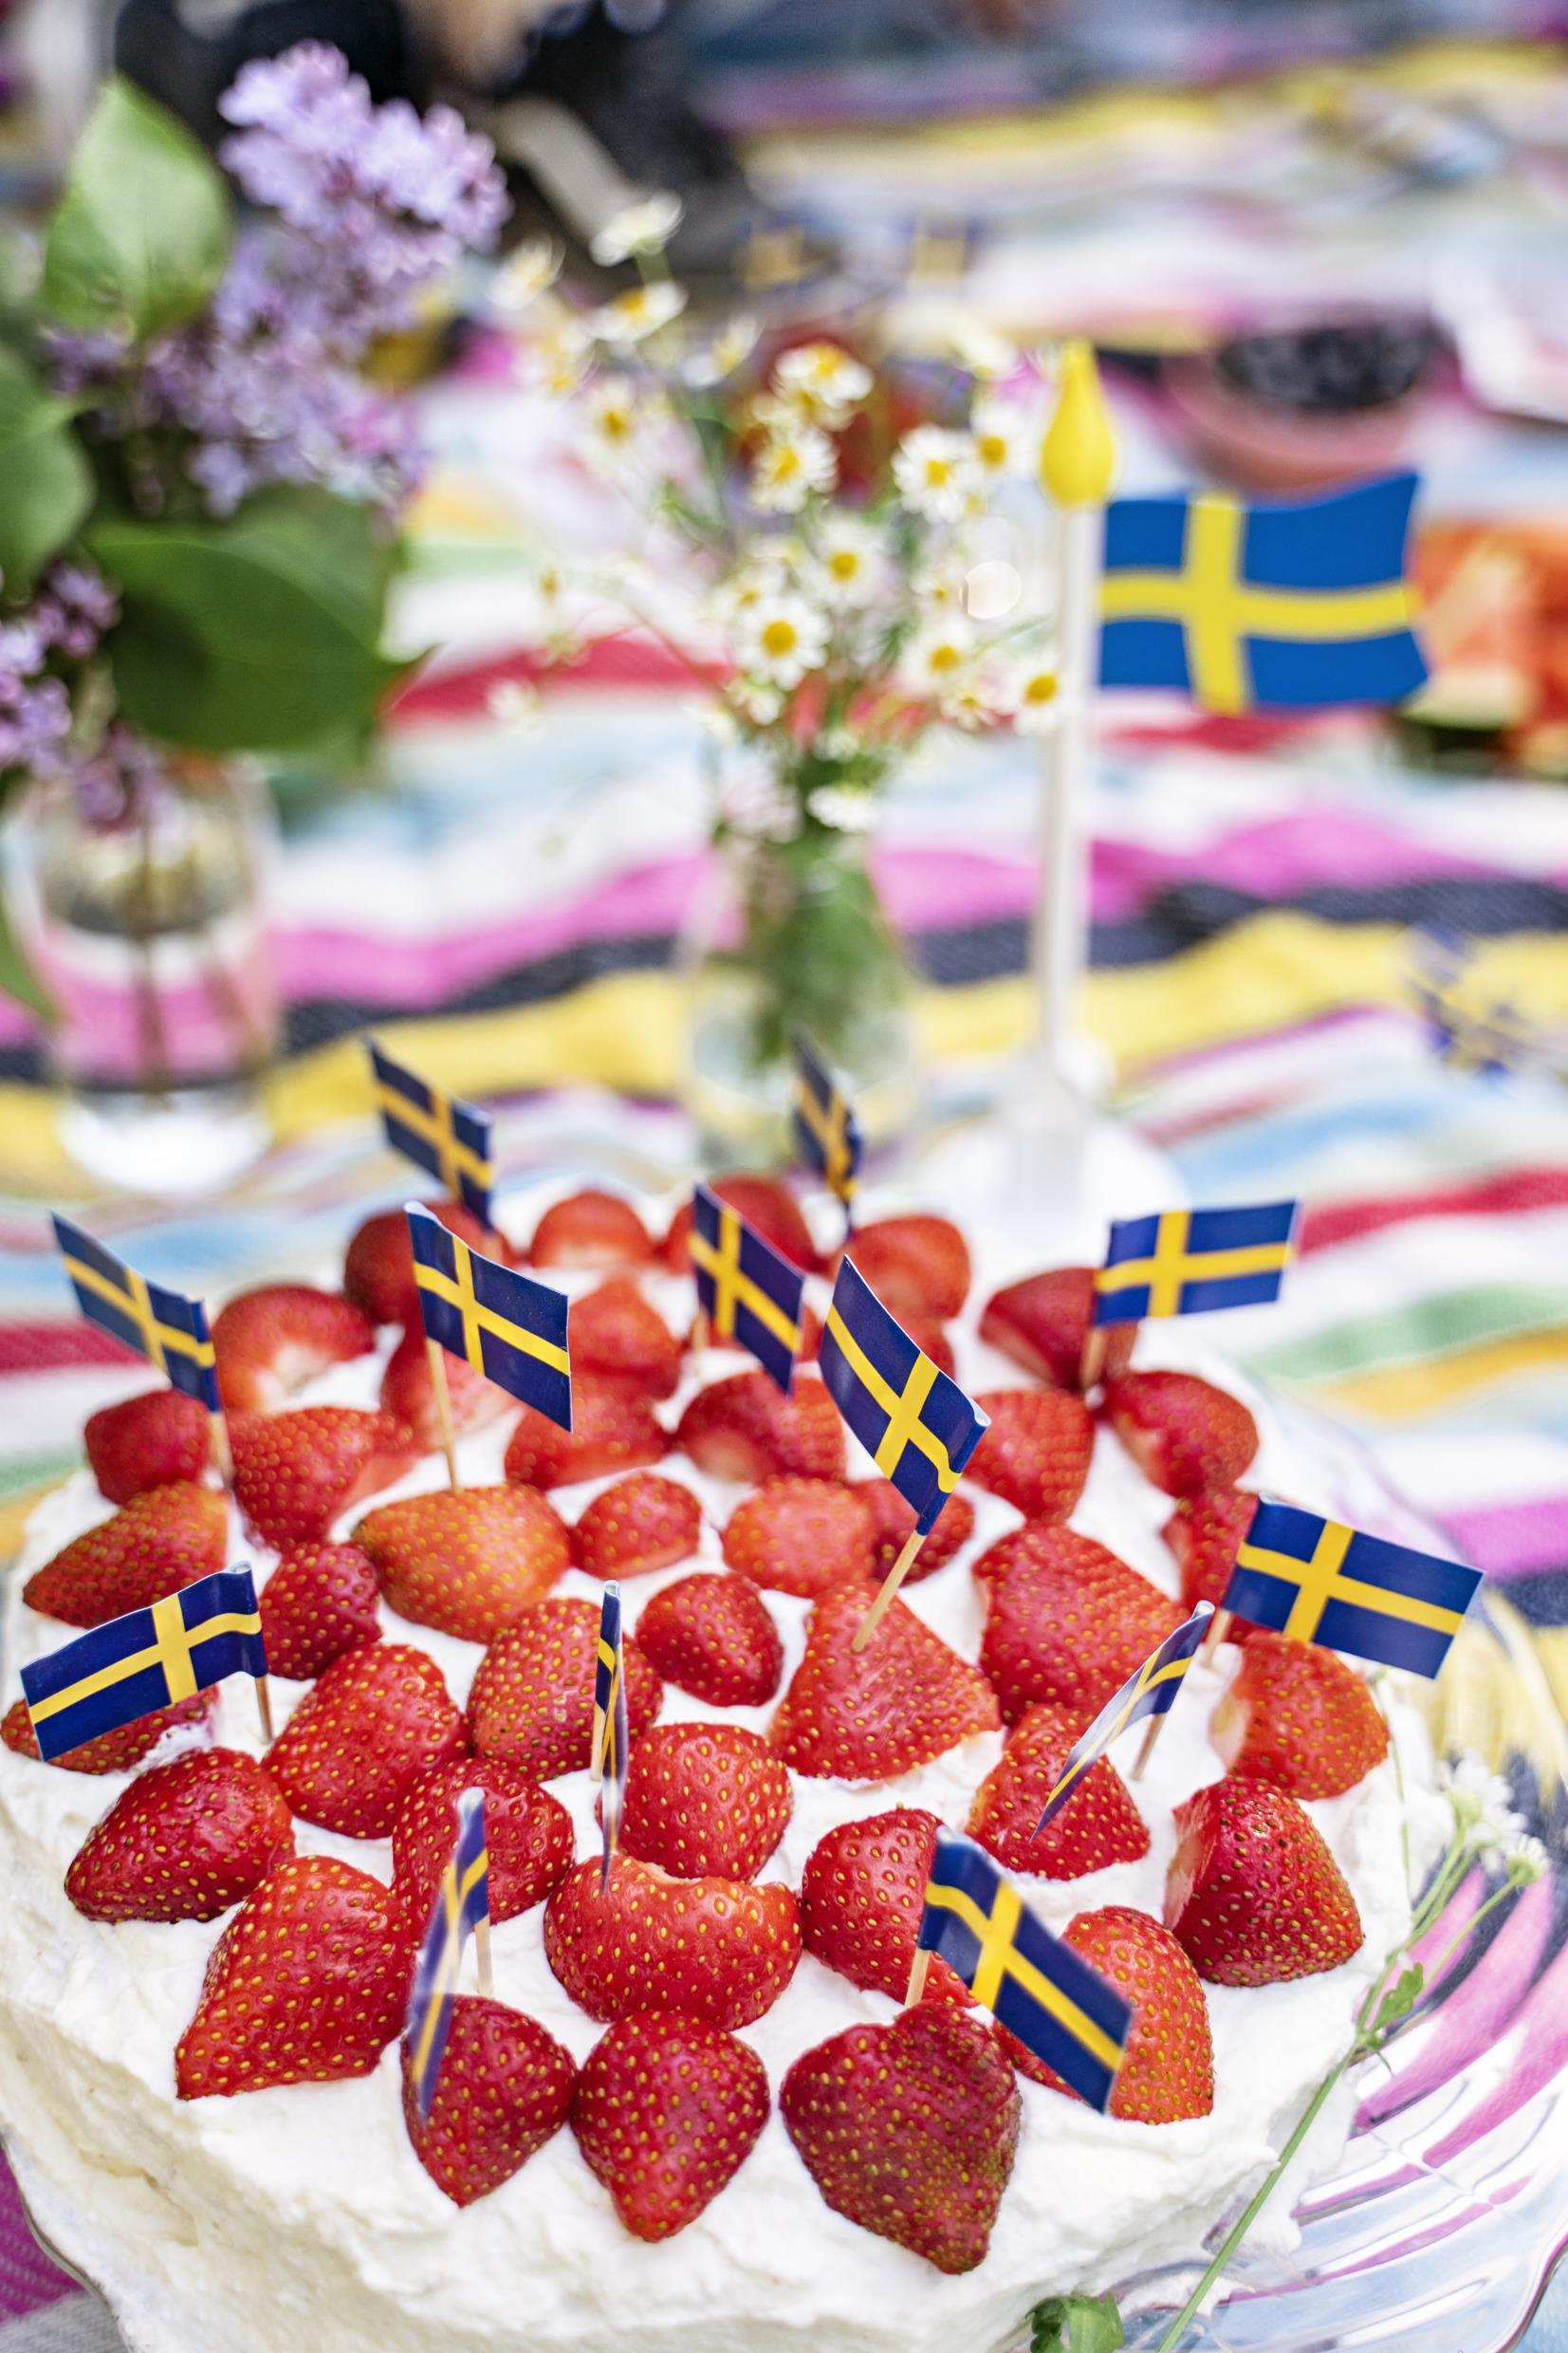 A strawberry cake decorated with many small Swedish flags.